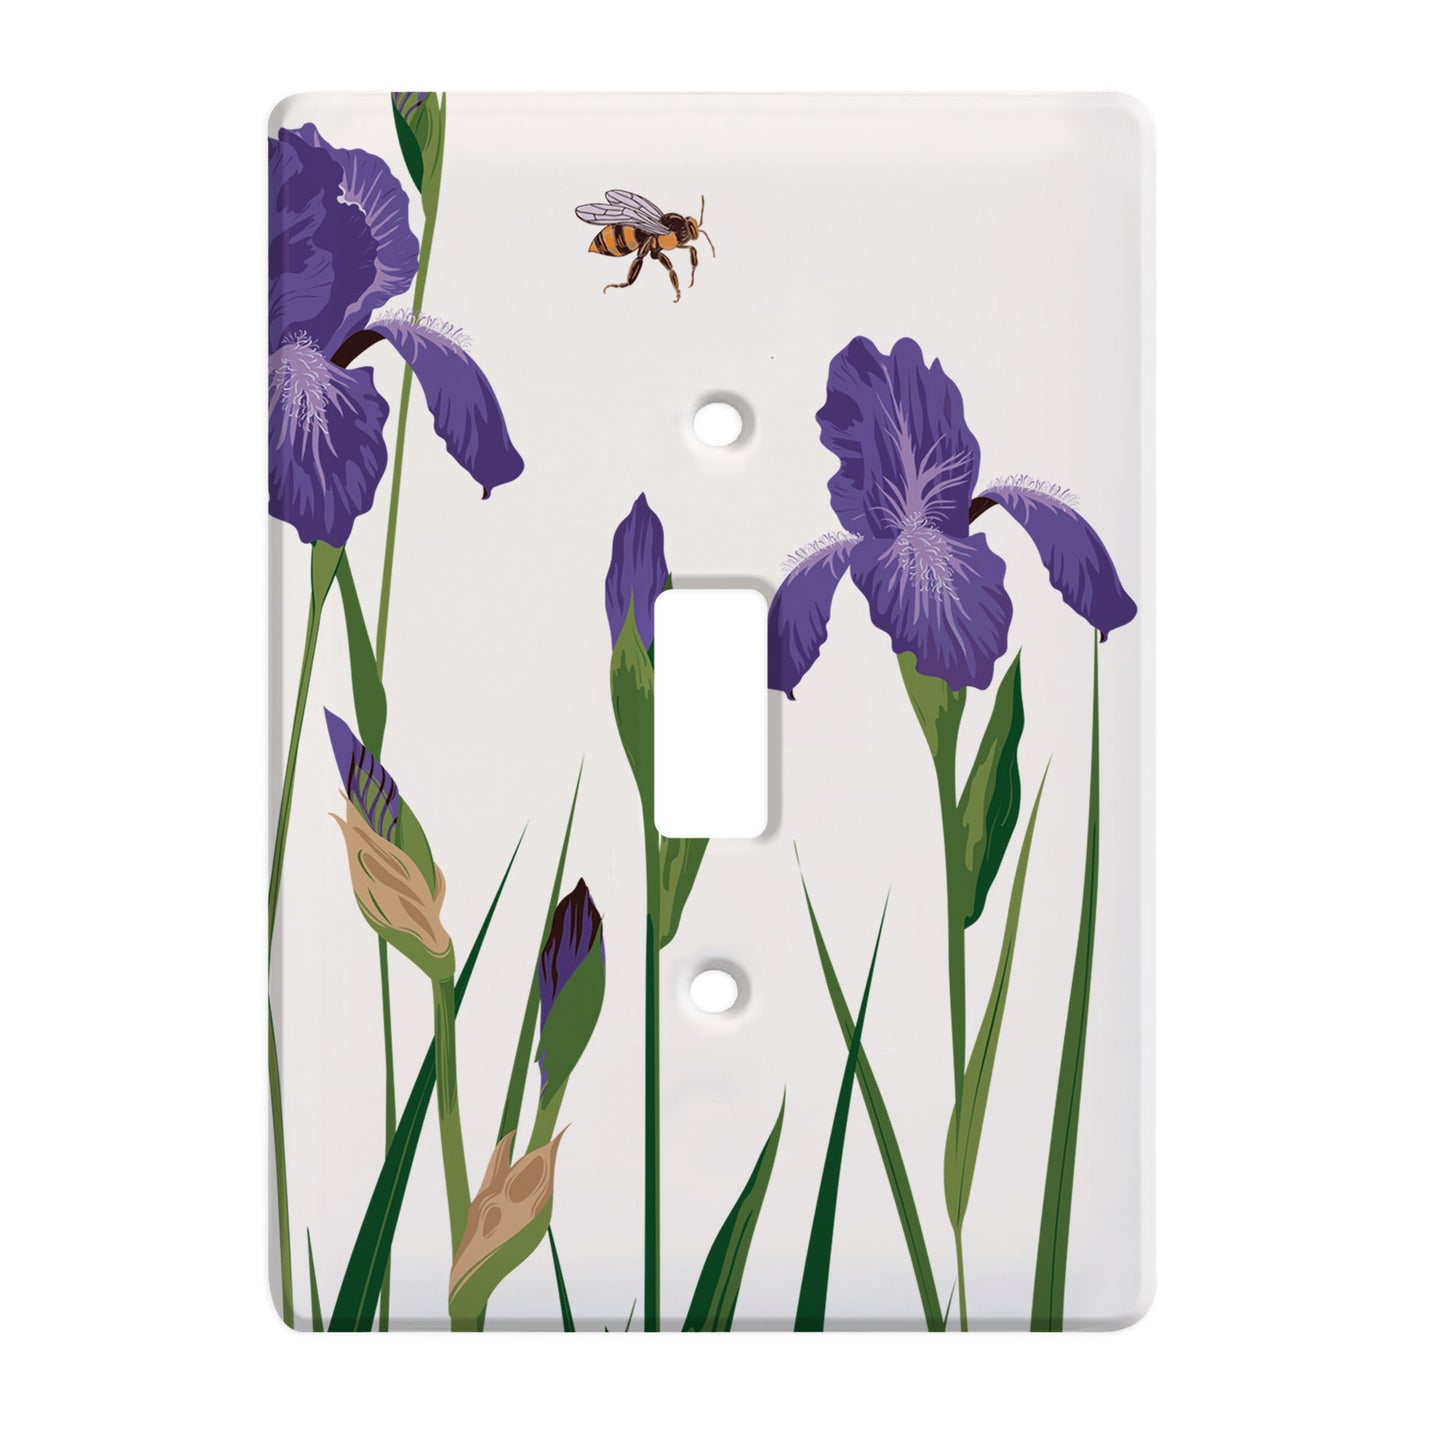 white ceramic single toggle switch plate featuring purple iris flowers and a bee hovering above them.